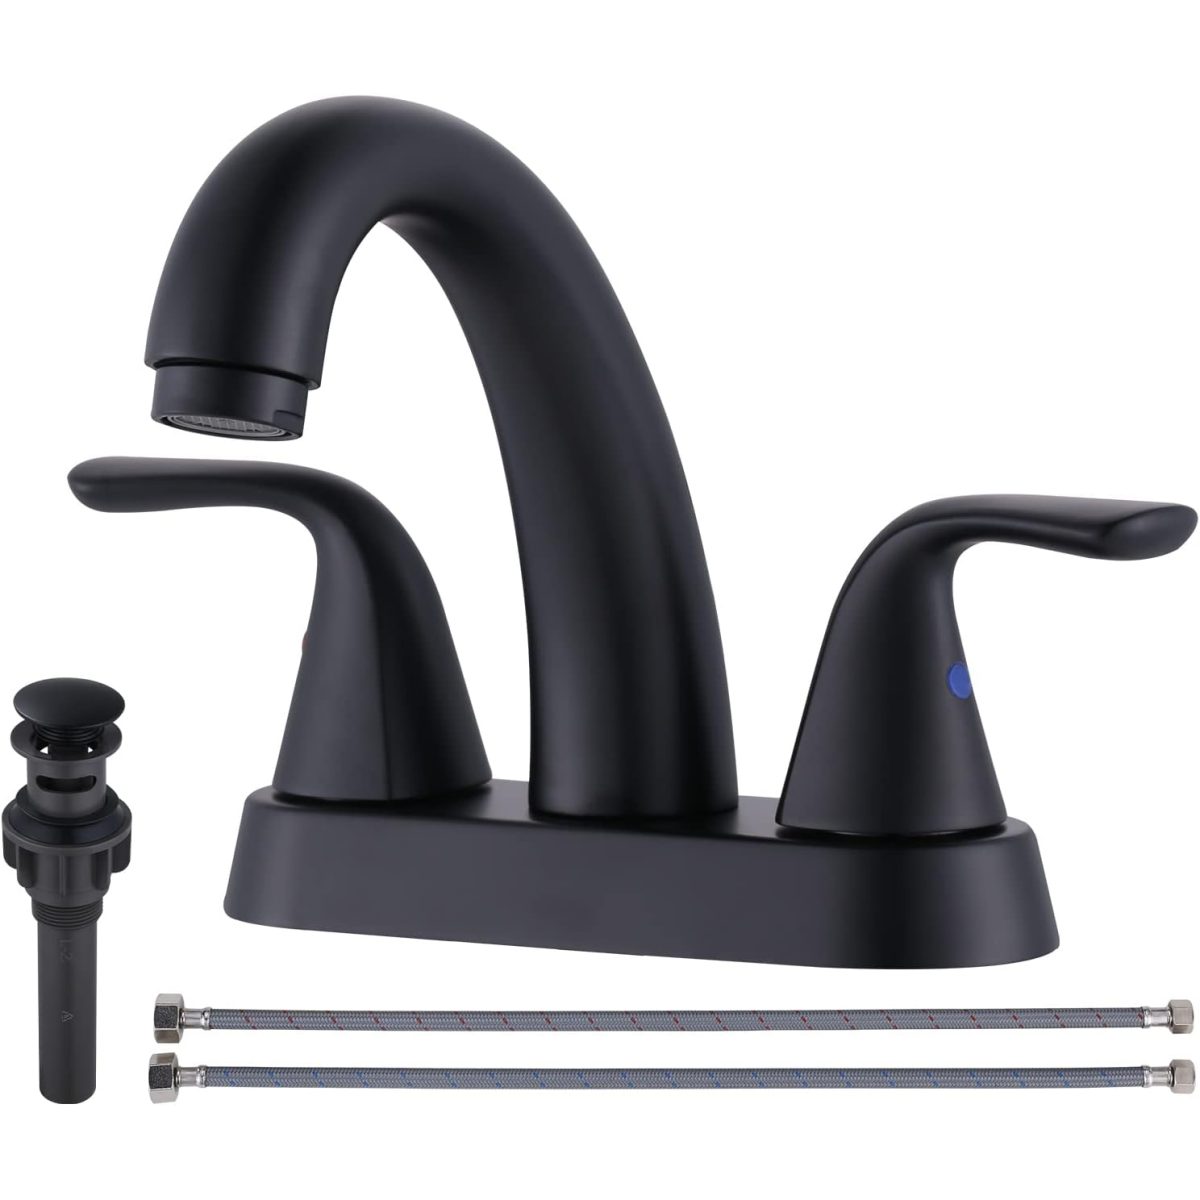 Premium quality :The bathroom faucet is made of durable and high grade stainless steel with matte black finish,so it has a good performance of anti corrosion and anti scratch.The ring is copper made and the valve is ceramic made to ensure the function stability and long lifetime. Design:The faucet is designed to fit 3-hole, 4" Centerset configurations.It can not only fit in home bathroom,but also fit in camper or RV toilet . Dimension:The length of the faucet is 8.5"while the width is 5" .From the spout to the bottom ,it is 3.8". Easy installation :The box is coming with installation accessories and guide ,so you can install this fixture without worry .Plus ,The faucet has a blue dot and red dot on each handle to remind you the side of cold and hot water. After sale Service: 30 days free return and 5-years warranty are offered. If you have any questions, please feel free to contact us.